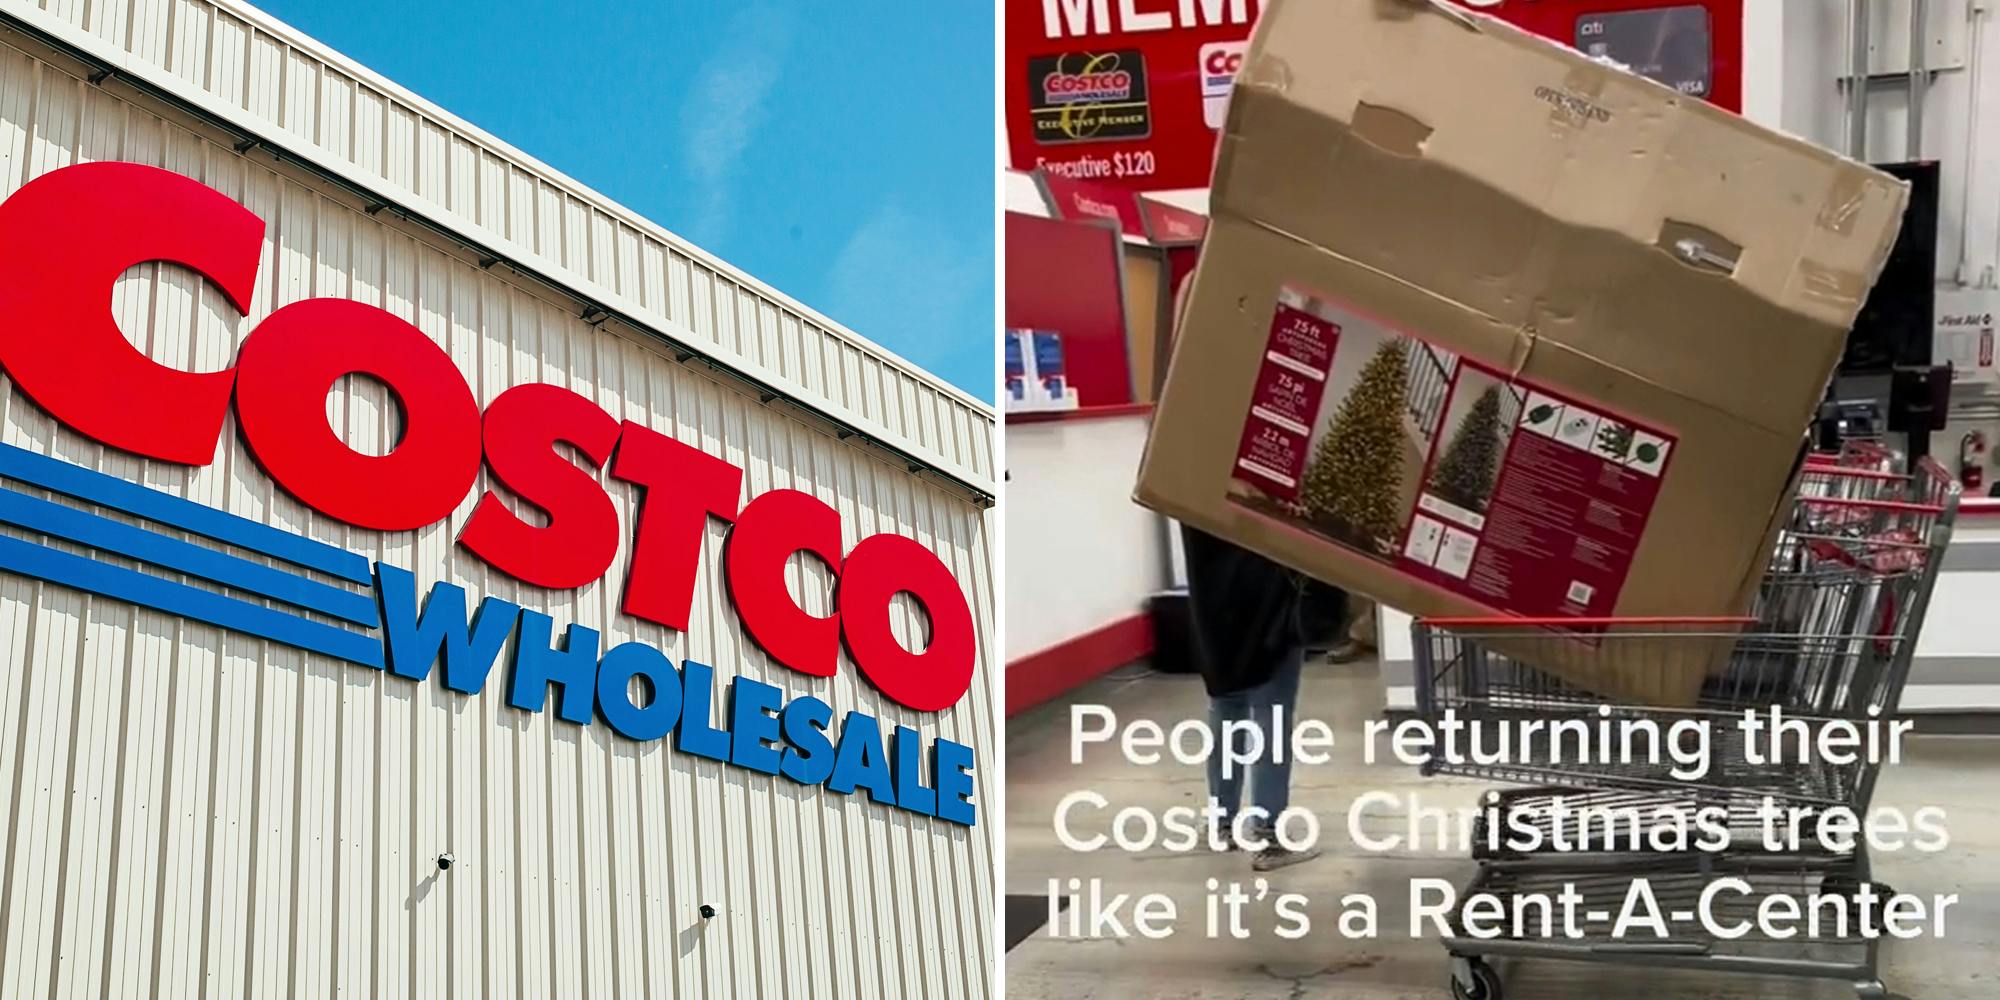 Costco Wholesale sign (l) Christmas tree in box in cart with caption "people returning their costco christmas trees like it's a Rent-A-Center" (r)